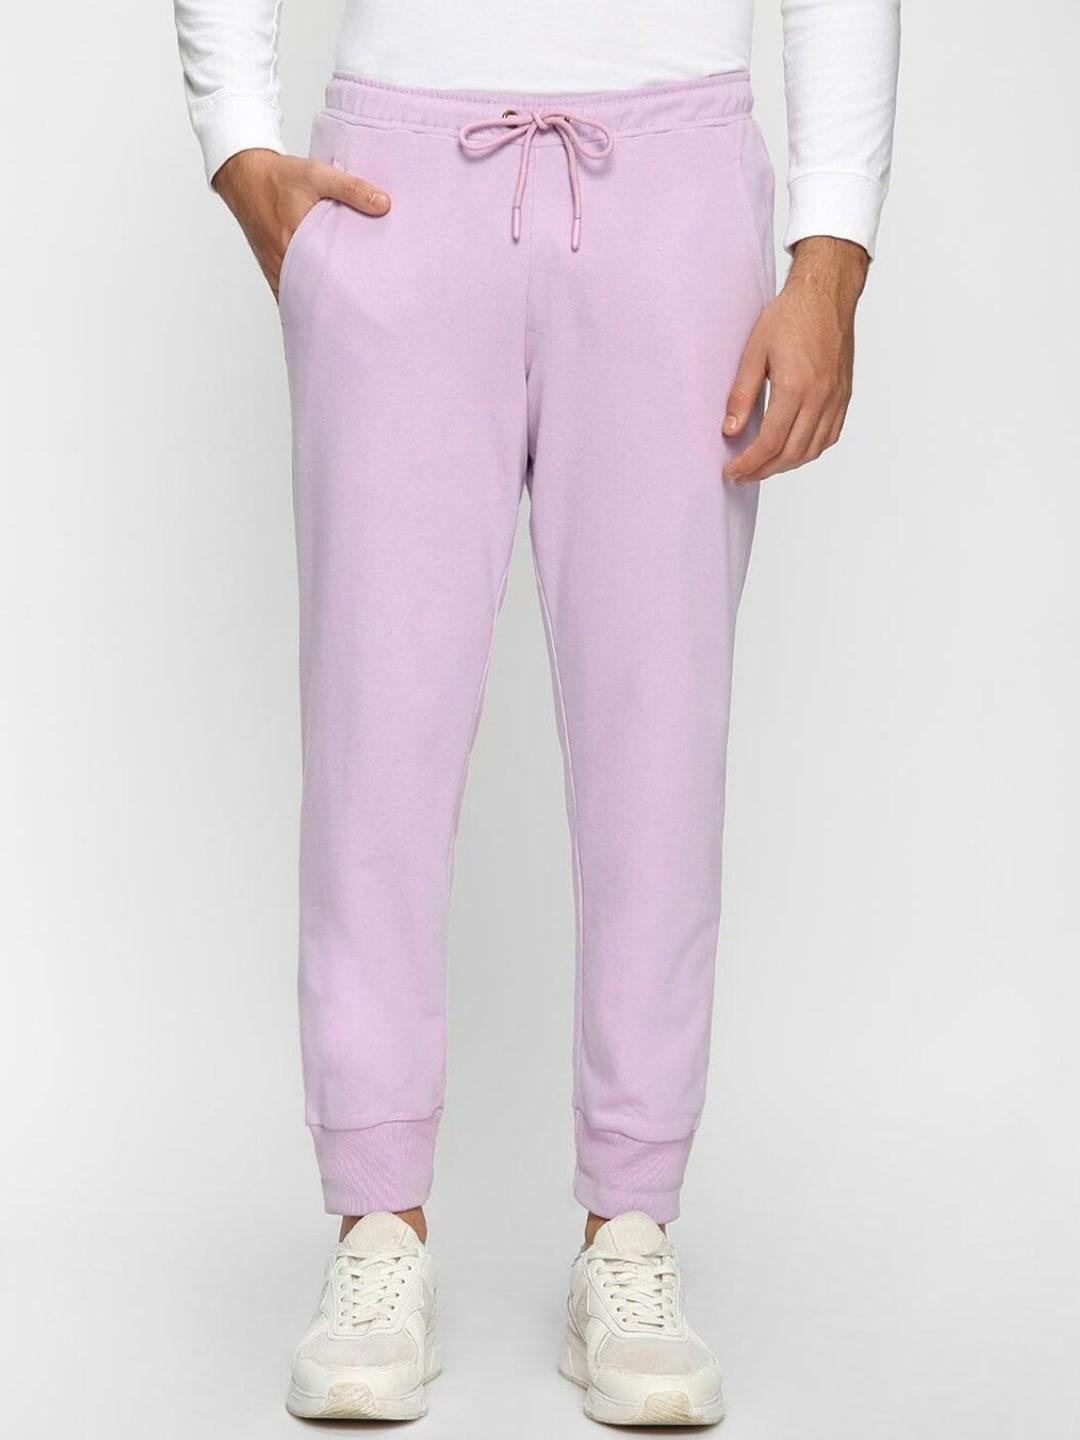 bewakoof-men-lavender-relaxed-fit-mid-rise--joggers